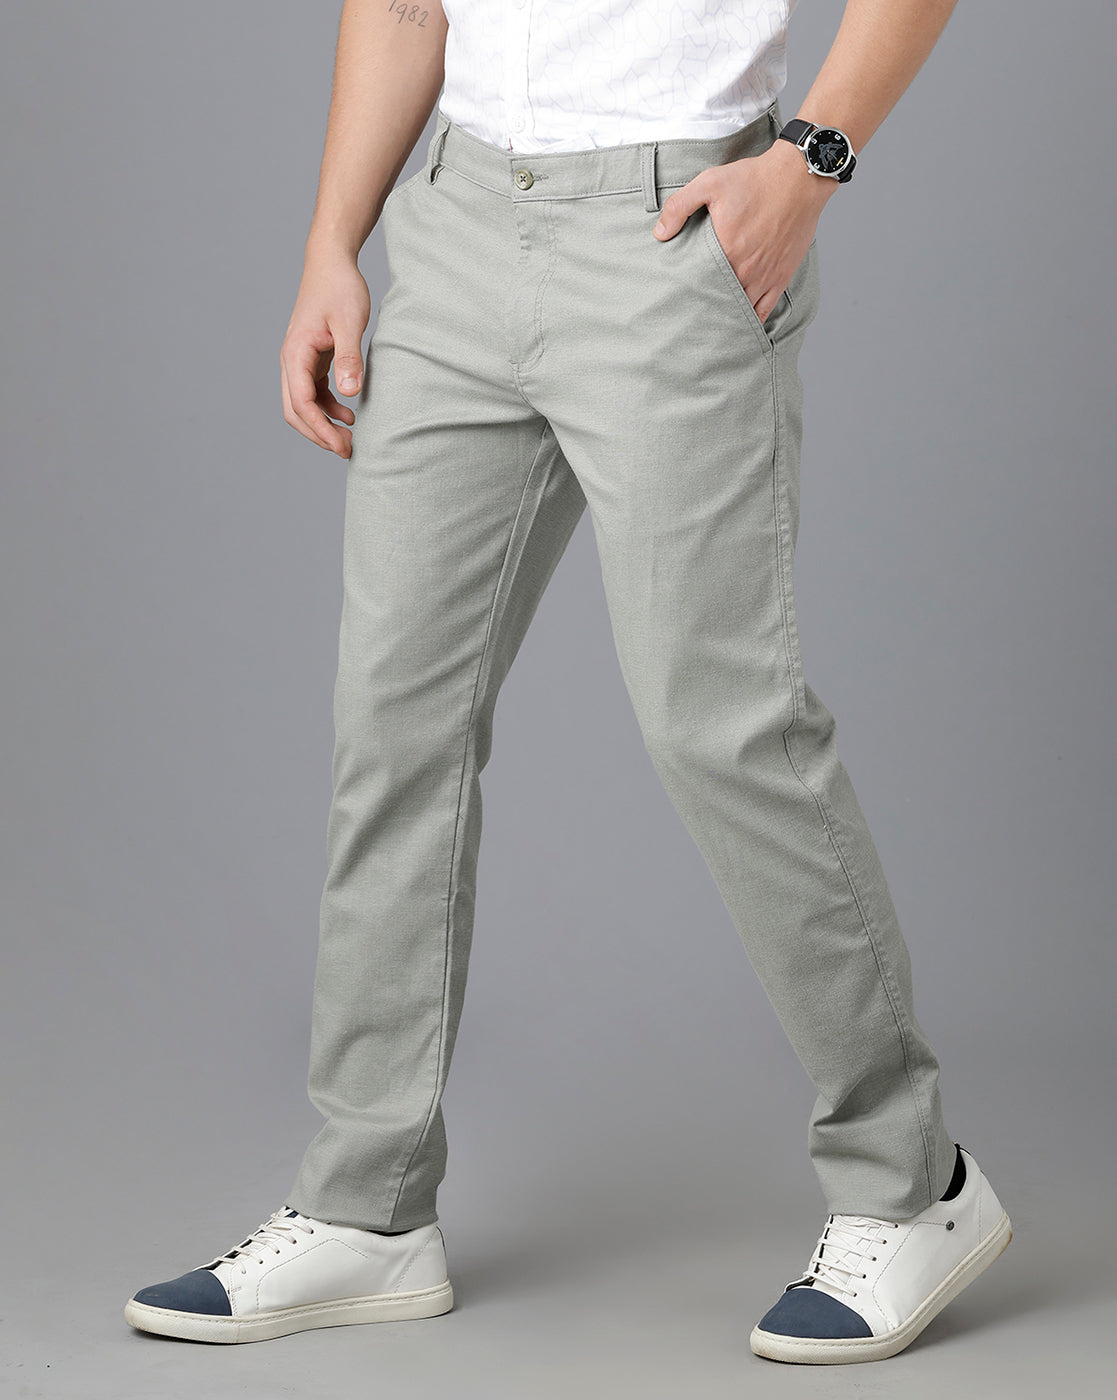 Buy Charcoal Grey Trousers online in India